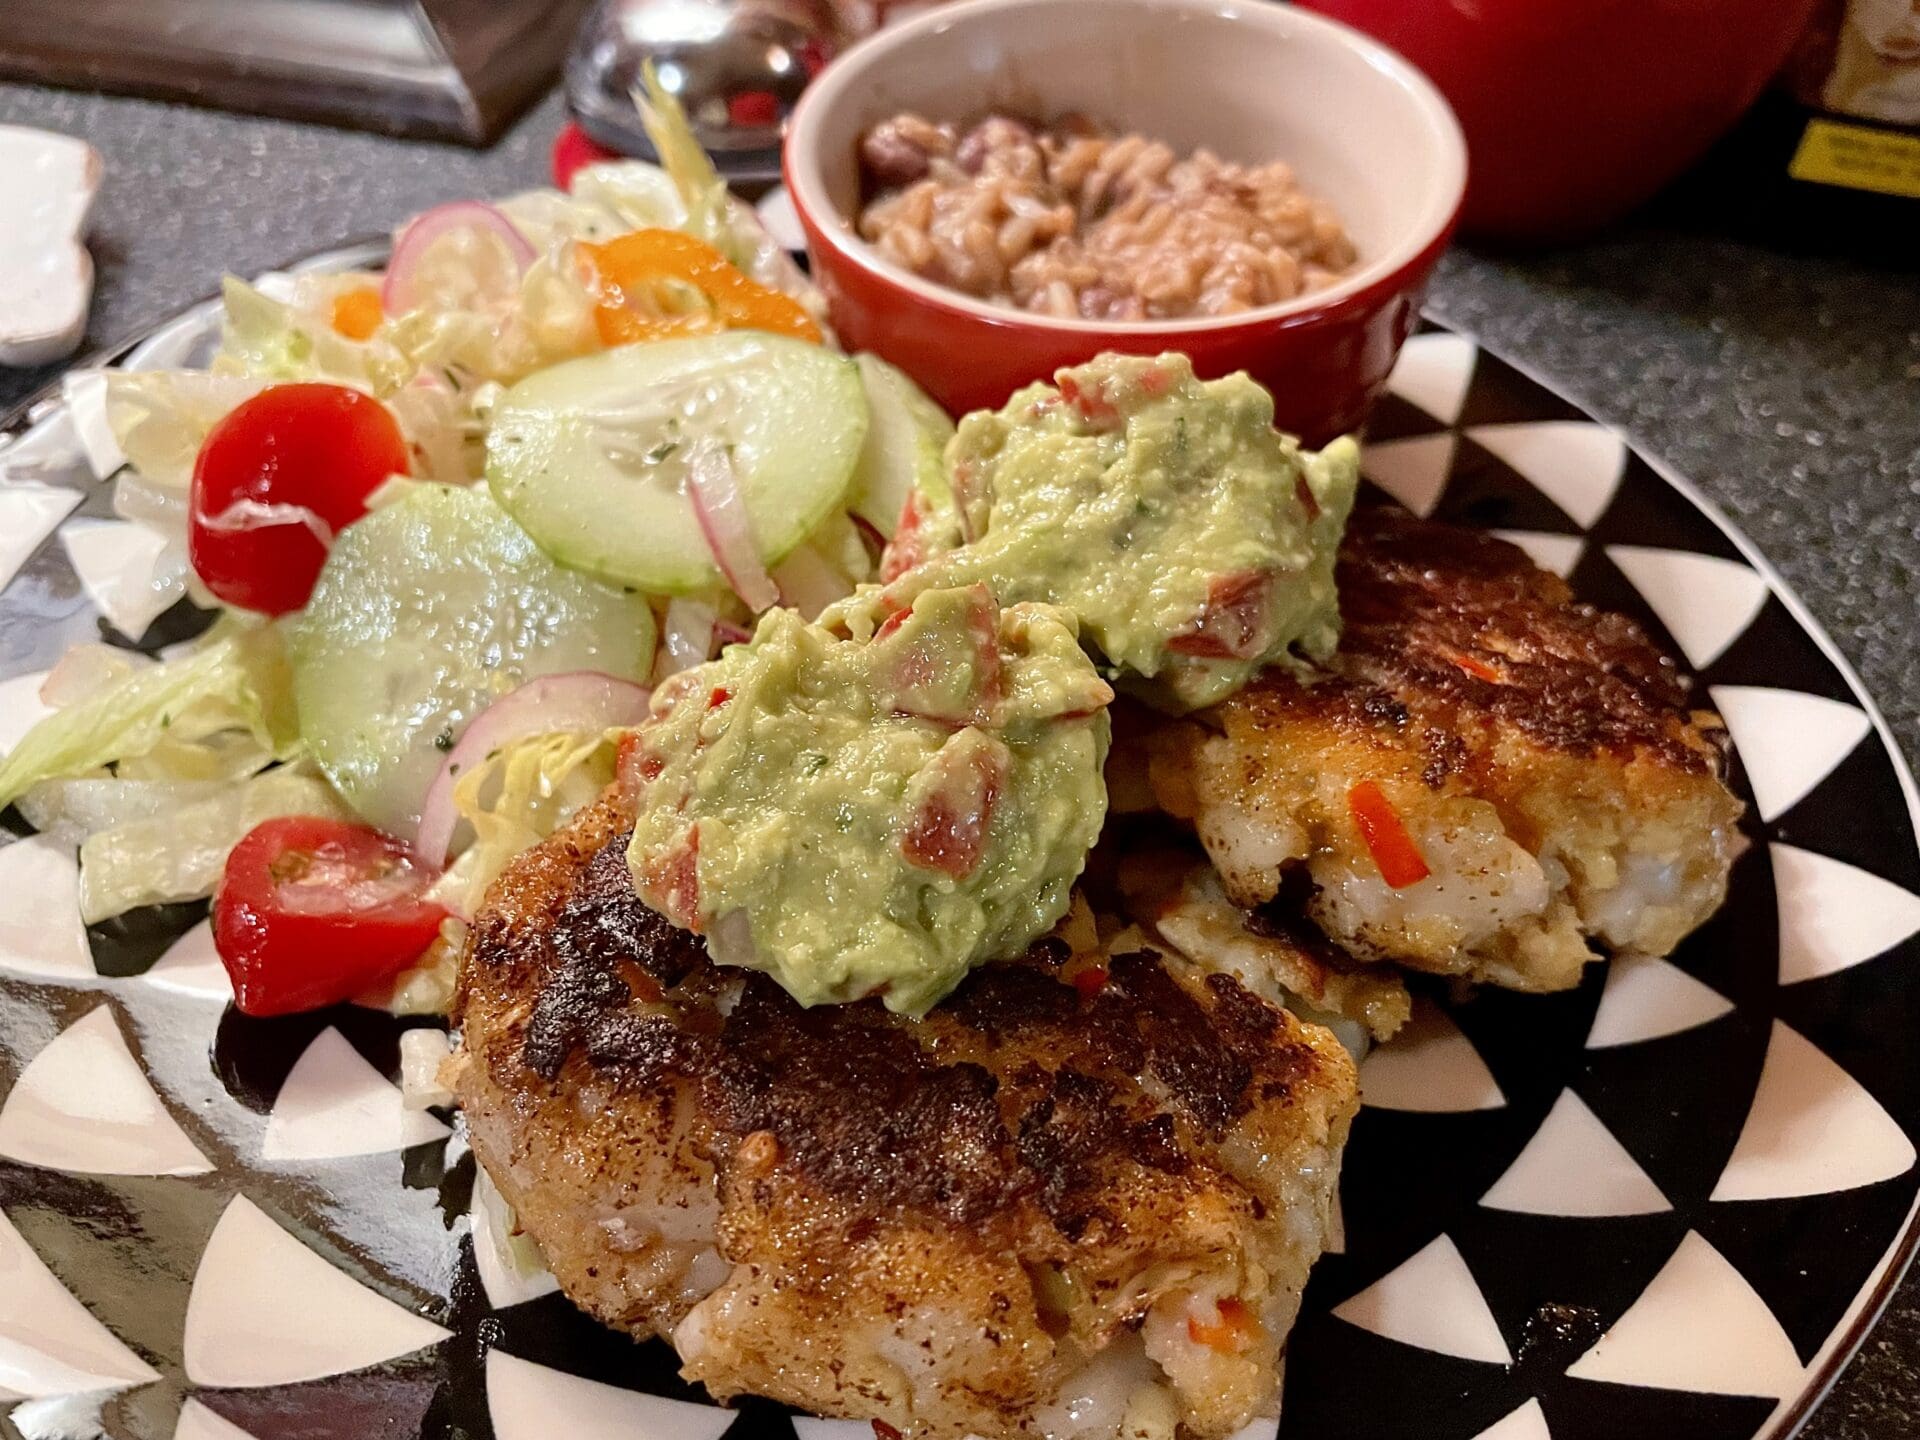 Crab cakes with guacamole and salad on a plate.